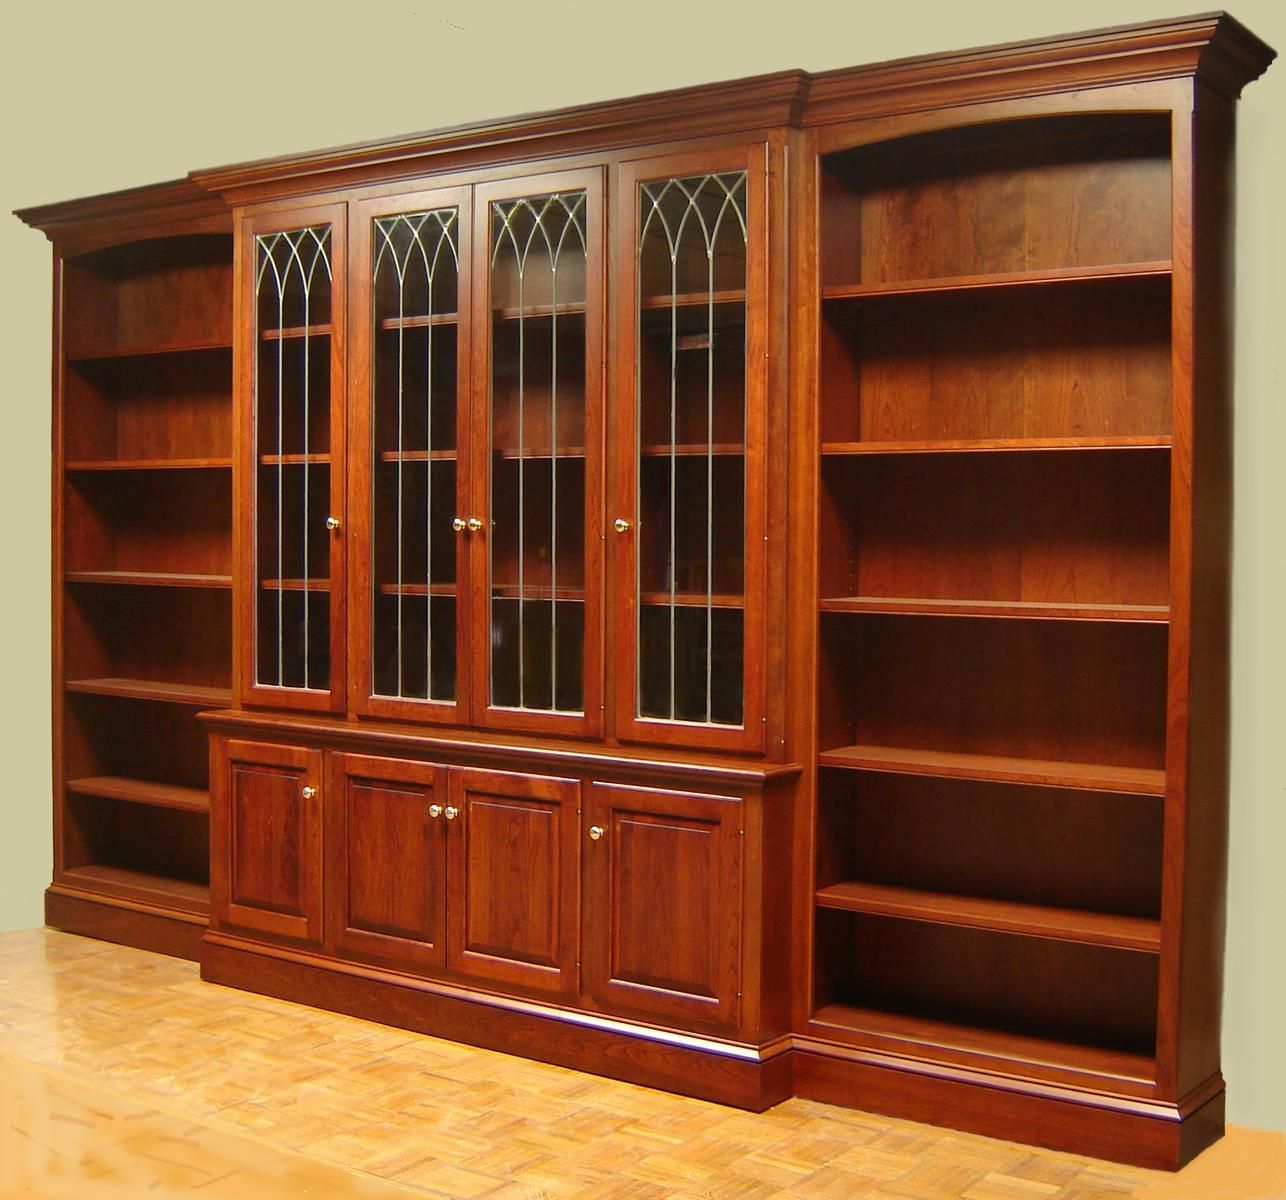 Handmade Cherry Bookcase With Leaded Glass Doors And Open Side Bookcases Odhner & Odhner Fine Woodworking Inc (View 5 of 15)